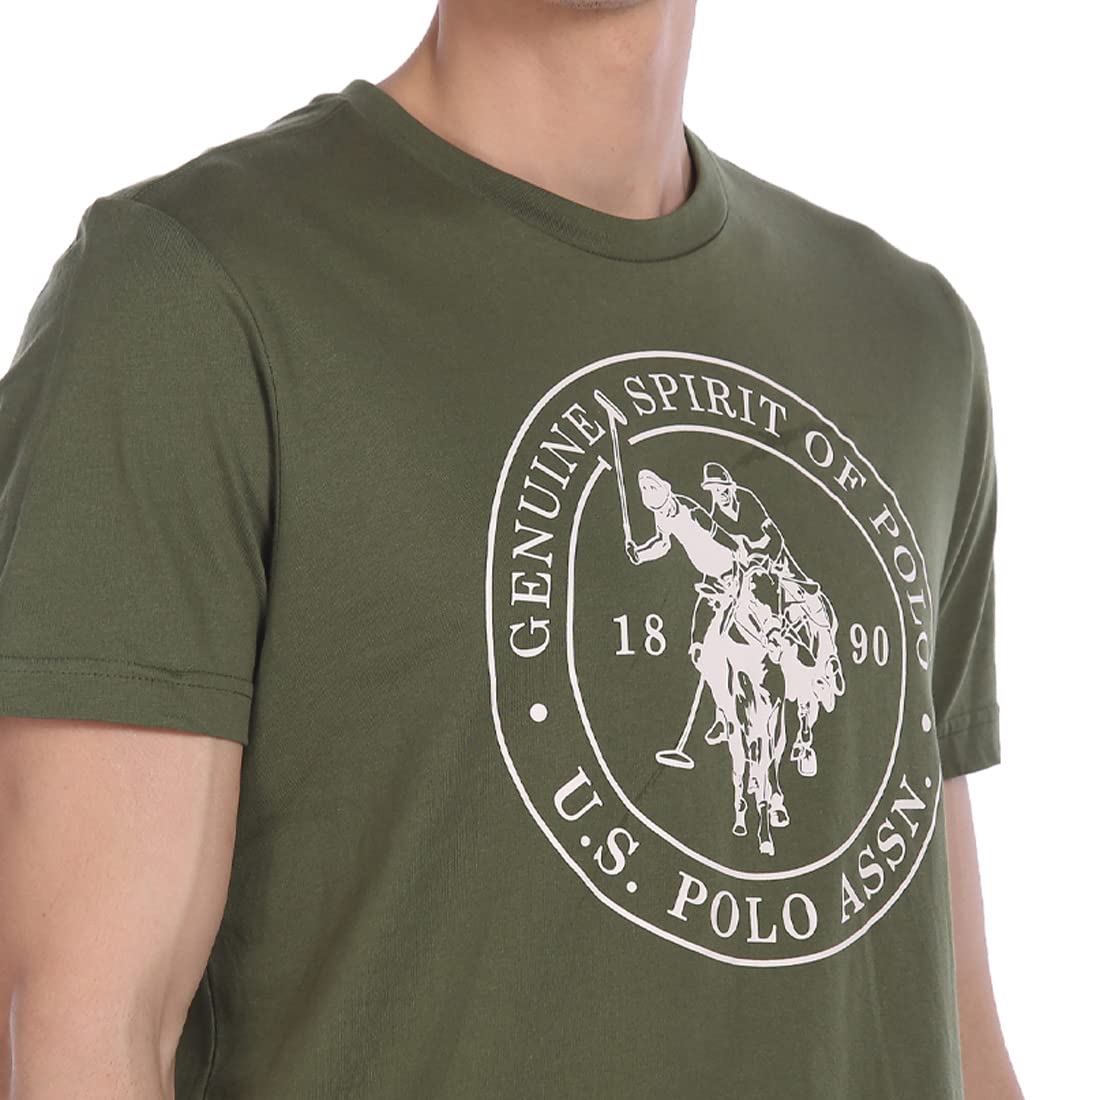 U.S. POLO ASSN. Men Comfort Fit Solid Cotton I643 T-Shirt - Pack of 1 (Olive XL)